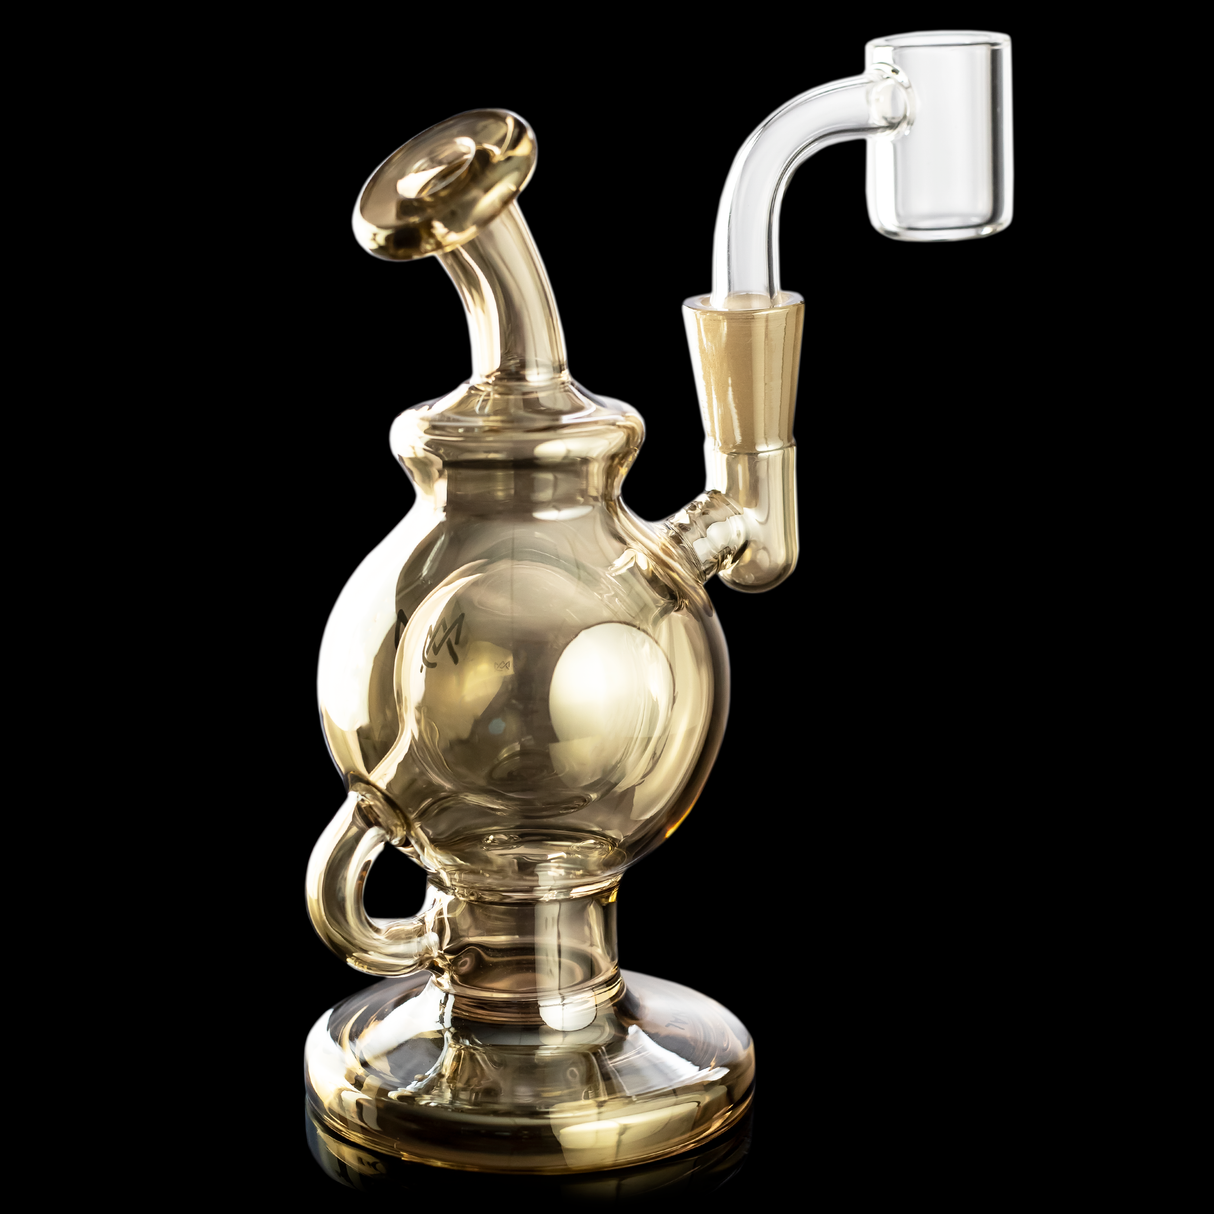 MJ Arsenal Gold Atlas Mini Rig LE with Honeycomb Percolator and 10mm Glass Banger